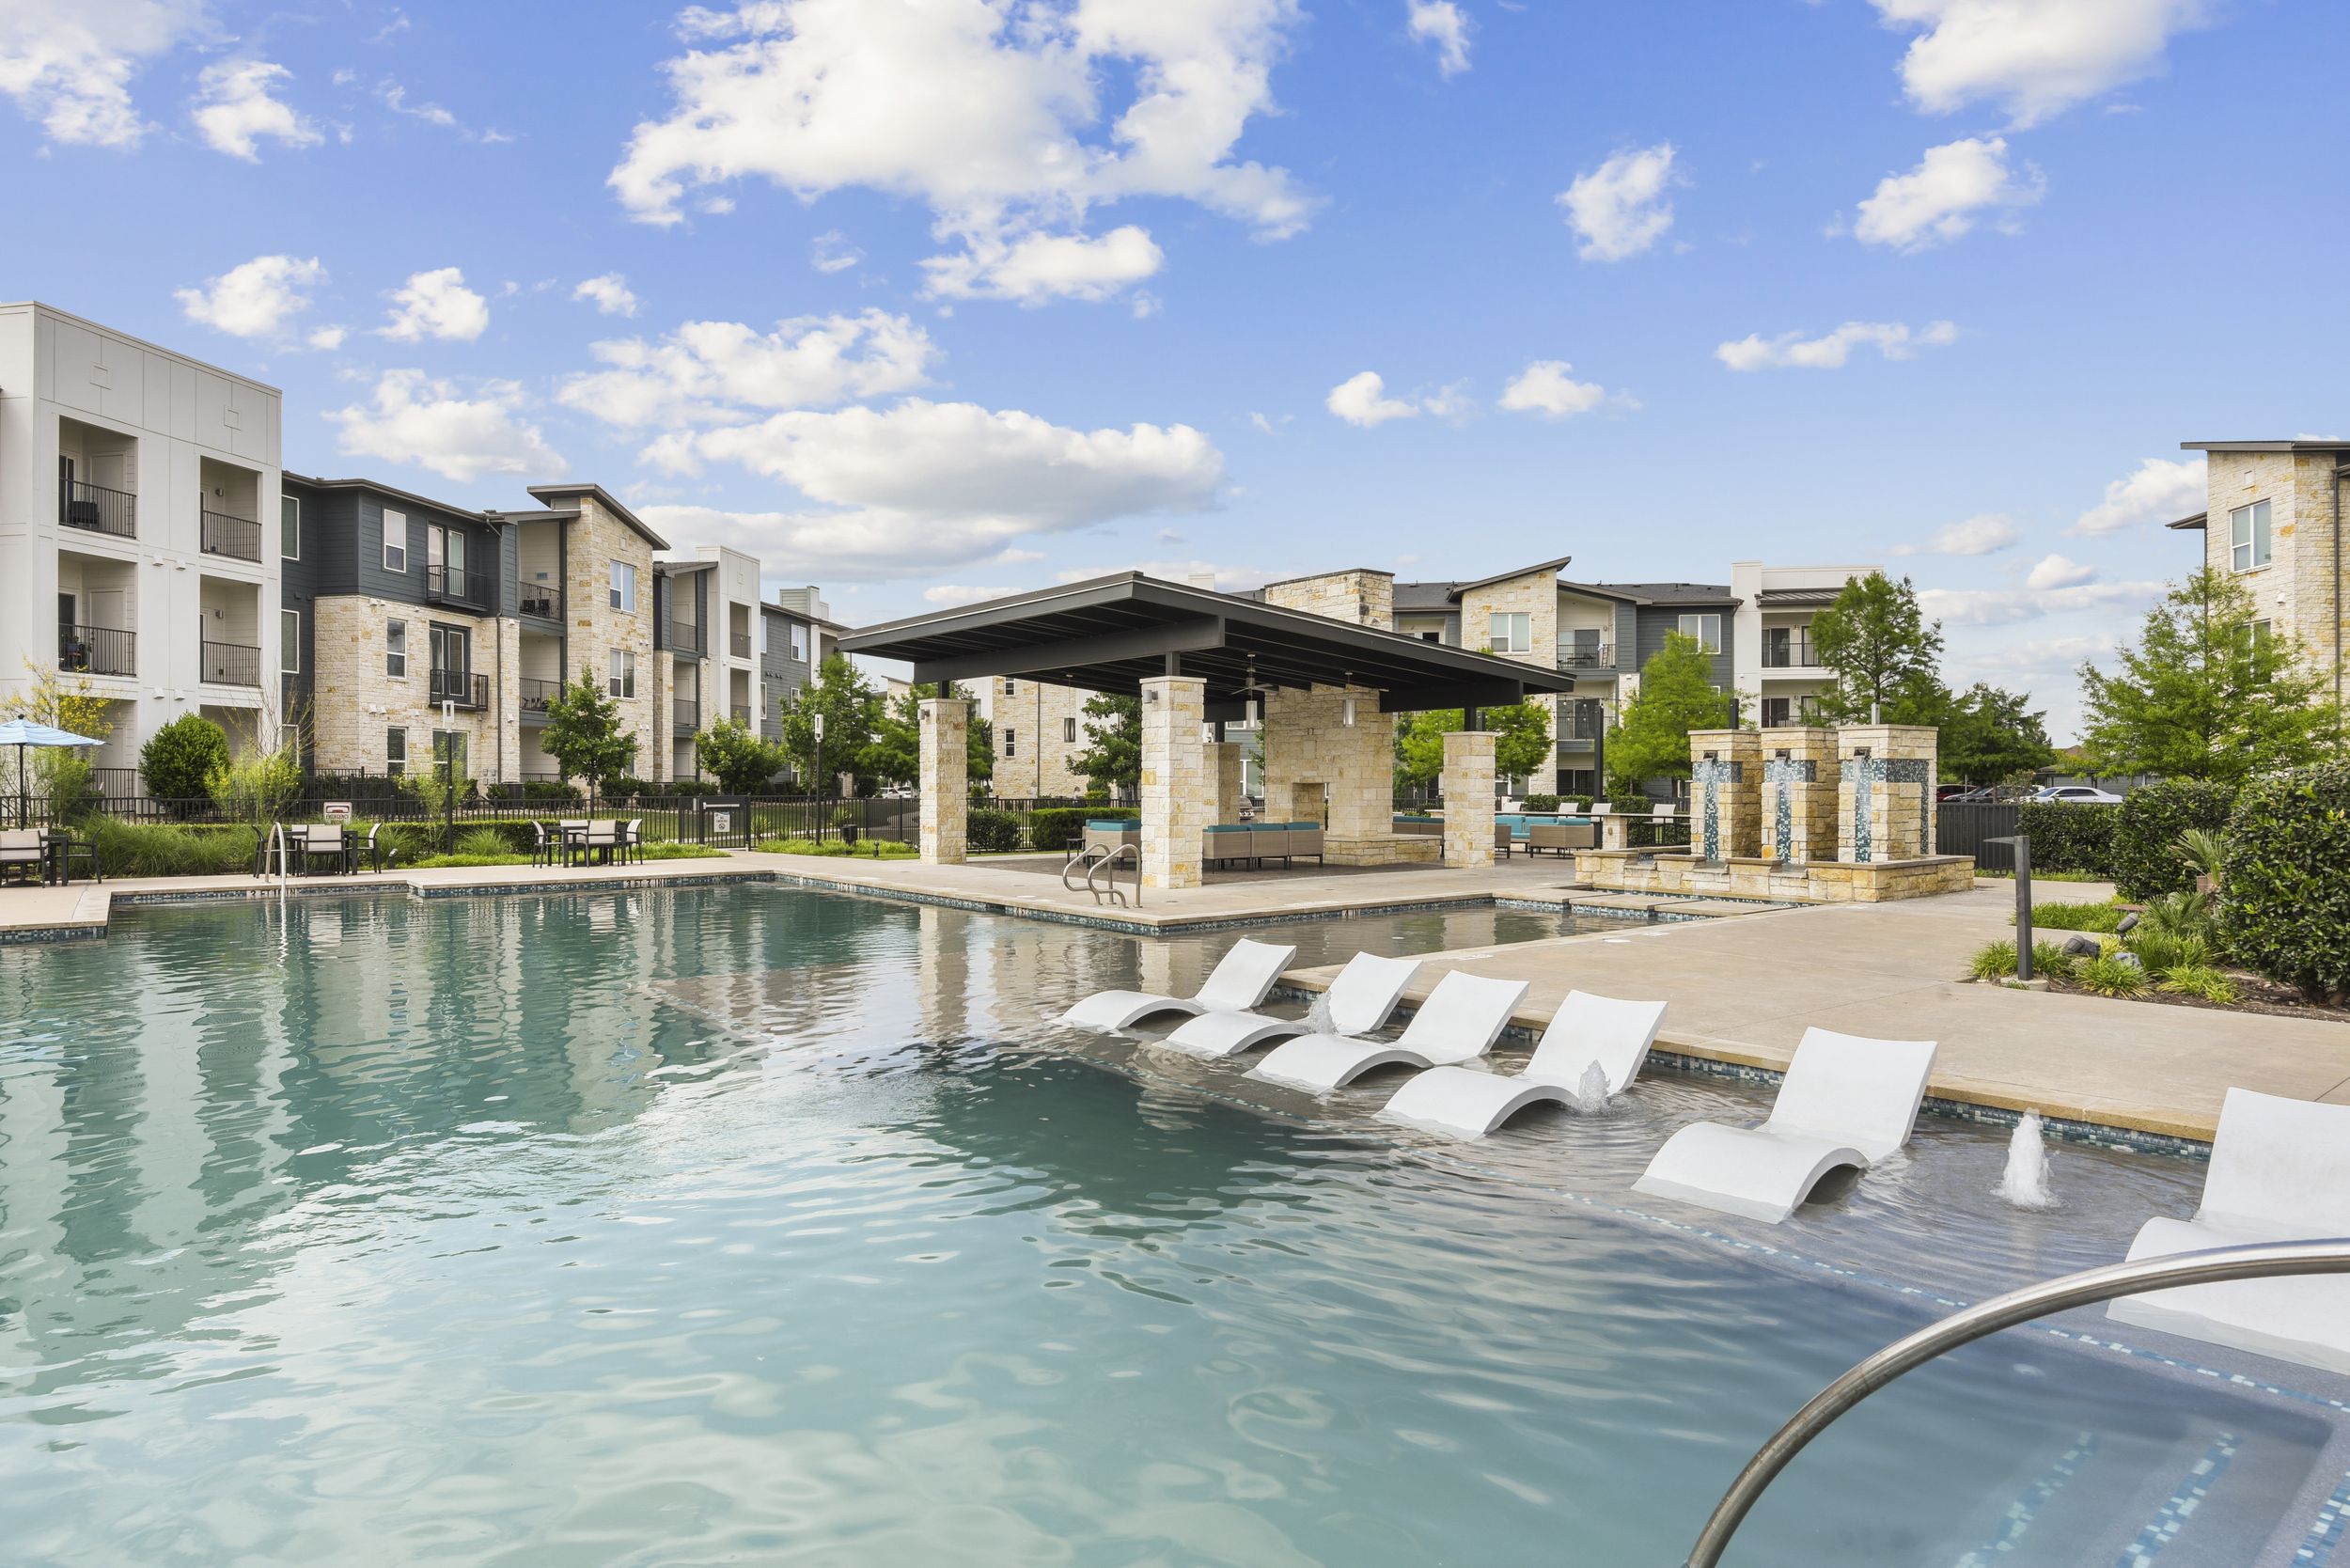 Resort-style swimming pool with a deck and seating at Lantower Techridge apartments